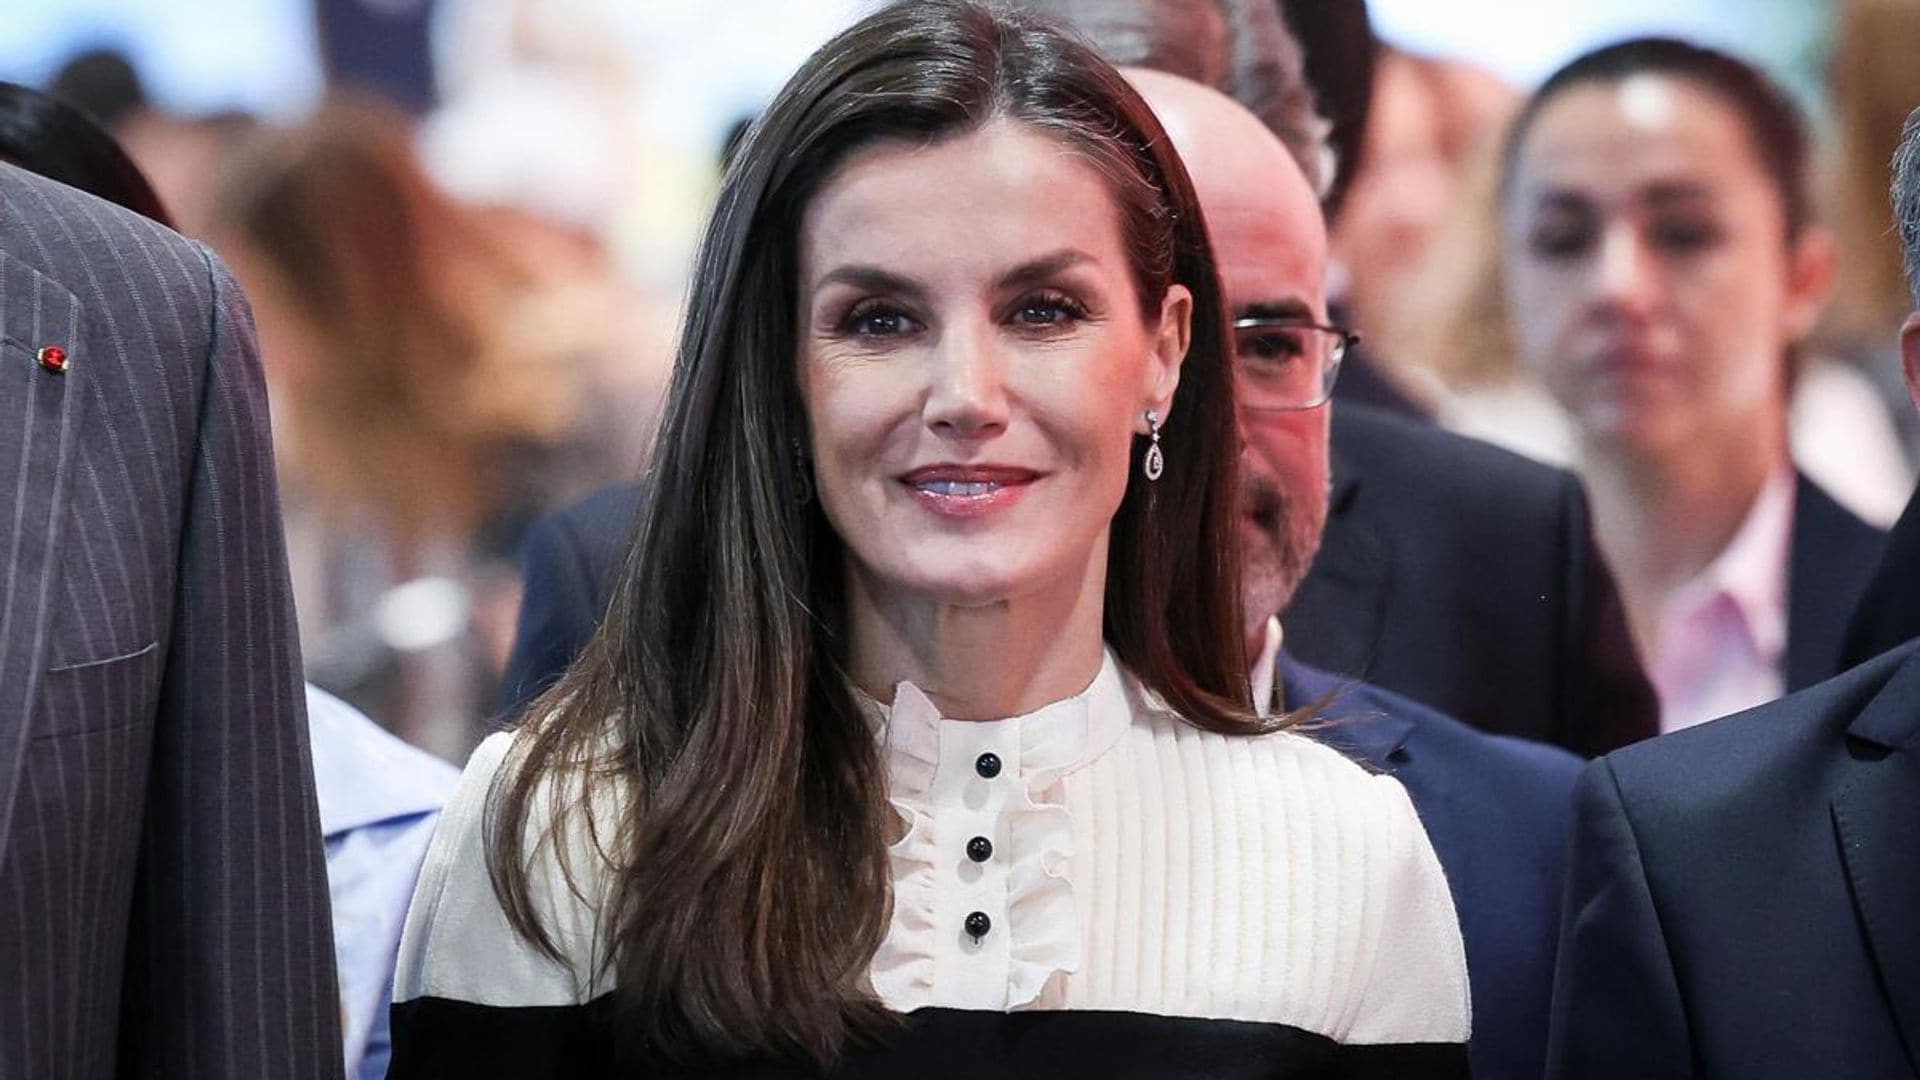 Queen Letizia of Spain looks chic in a contrast jumpsuit